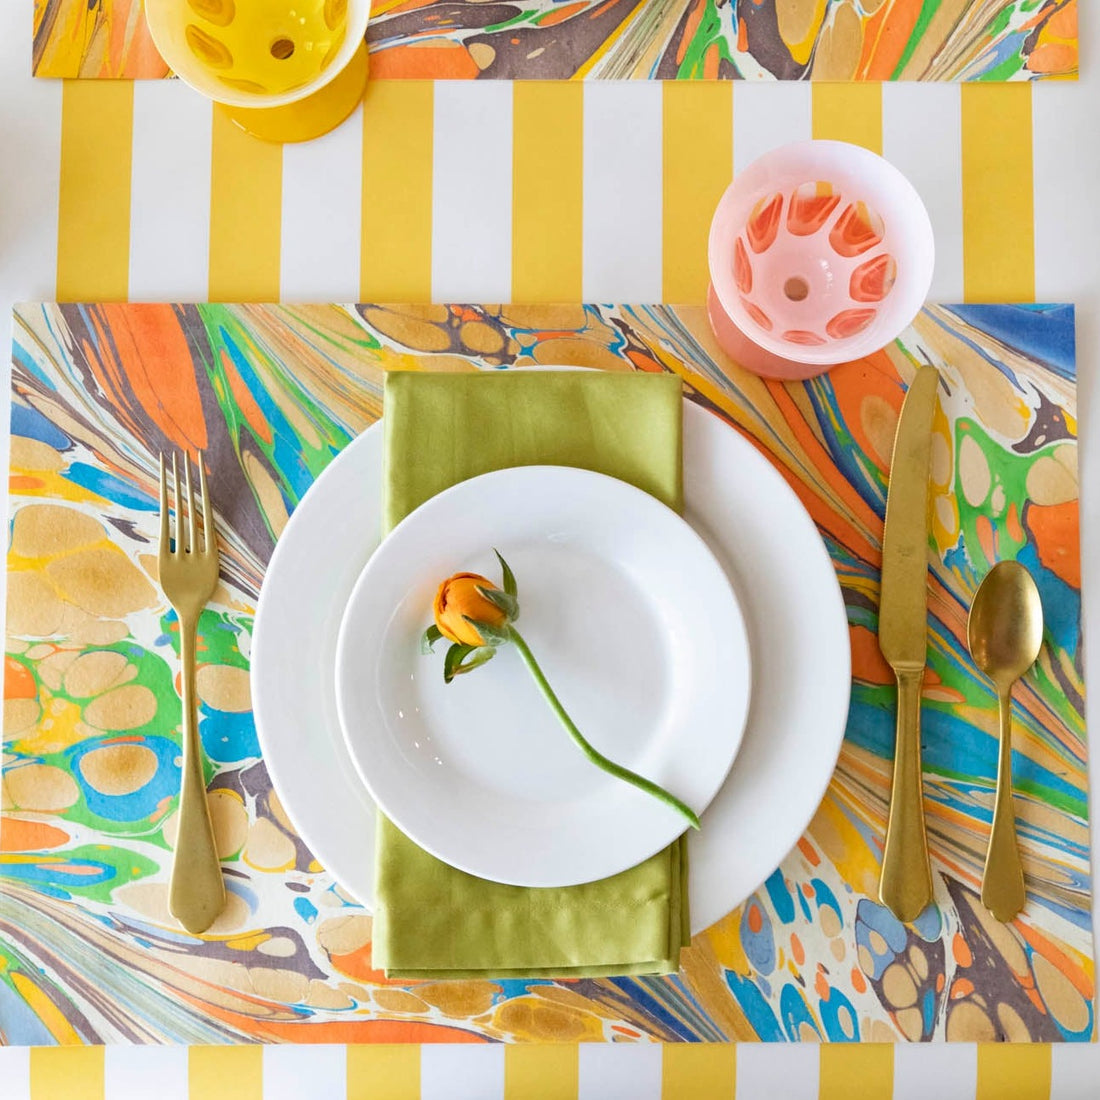 The Multi Color Fantasy Marbled Placemat under a vibrant place setting, from above.